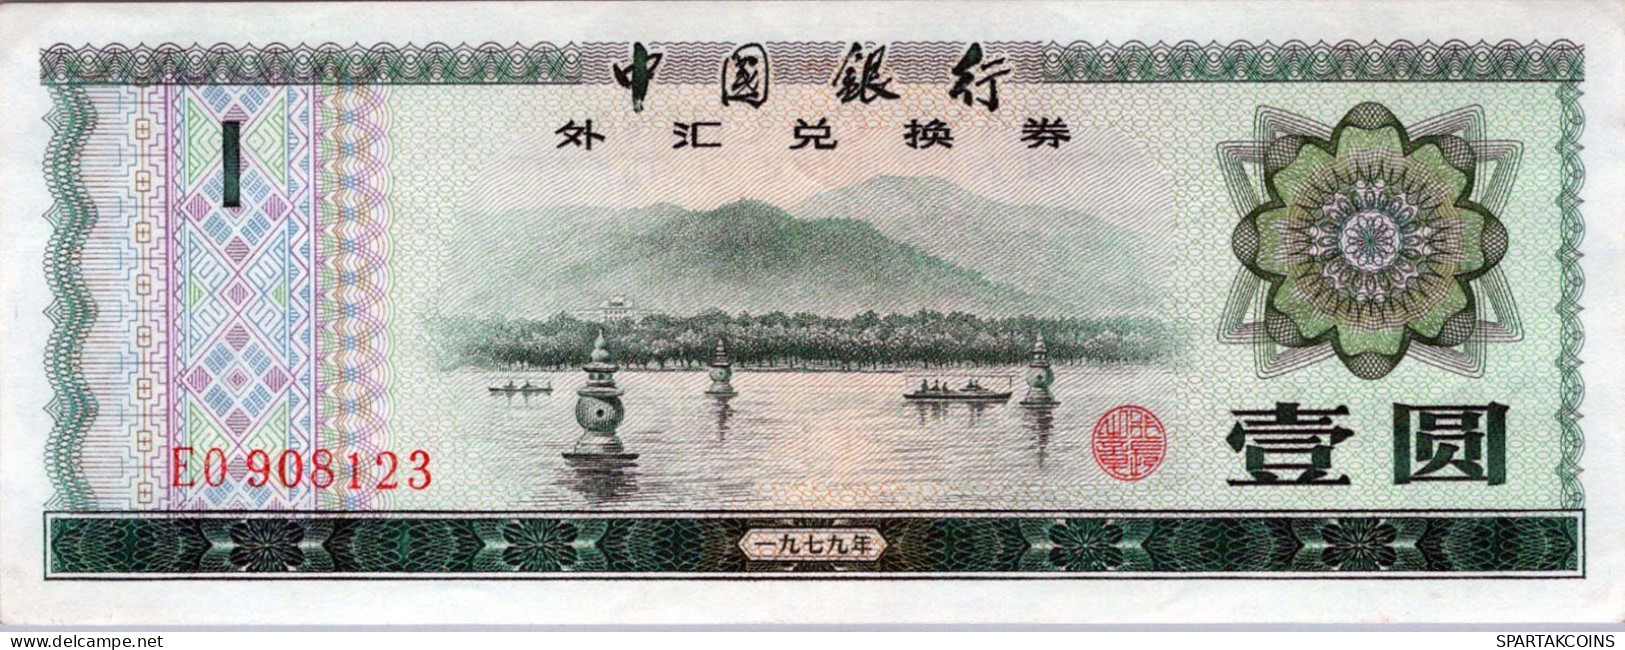 1 YUAN 1979 CHINESISCH Papiergeld Banknote #PJ362 - [11] Local Banknote Issues